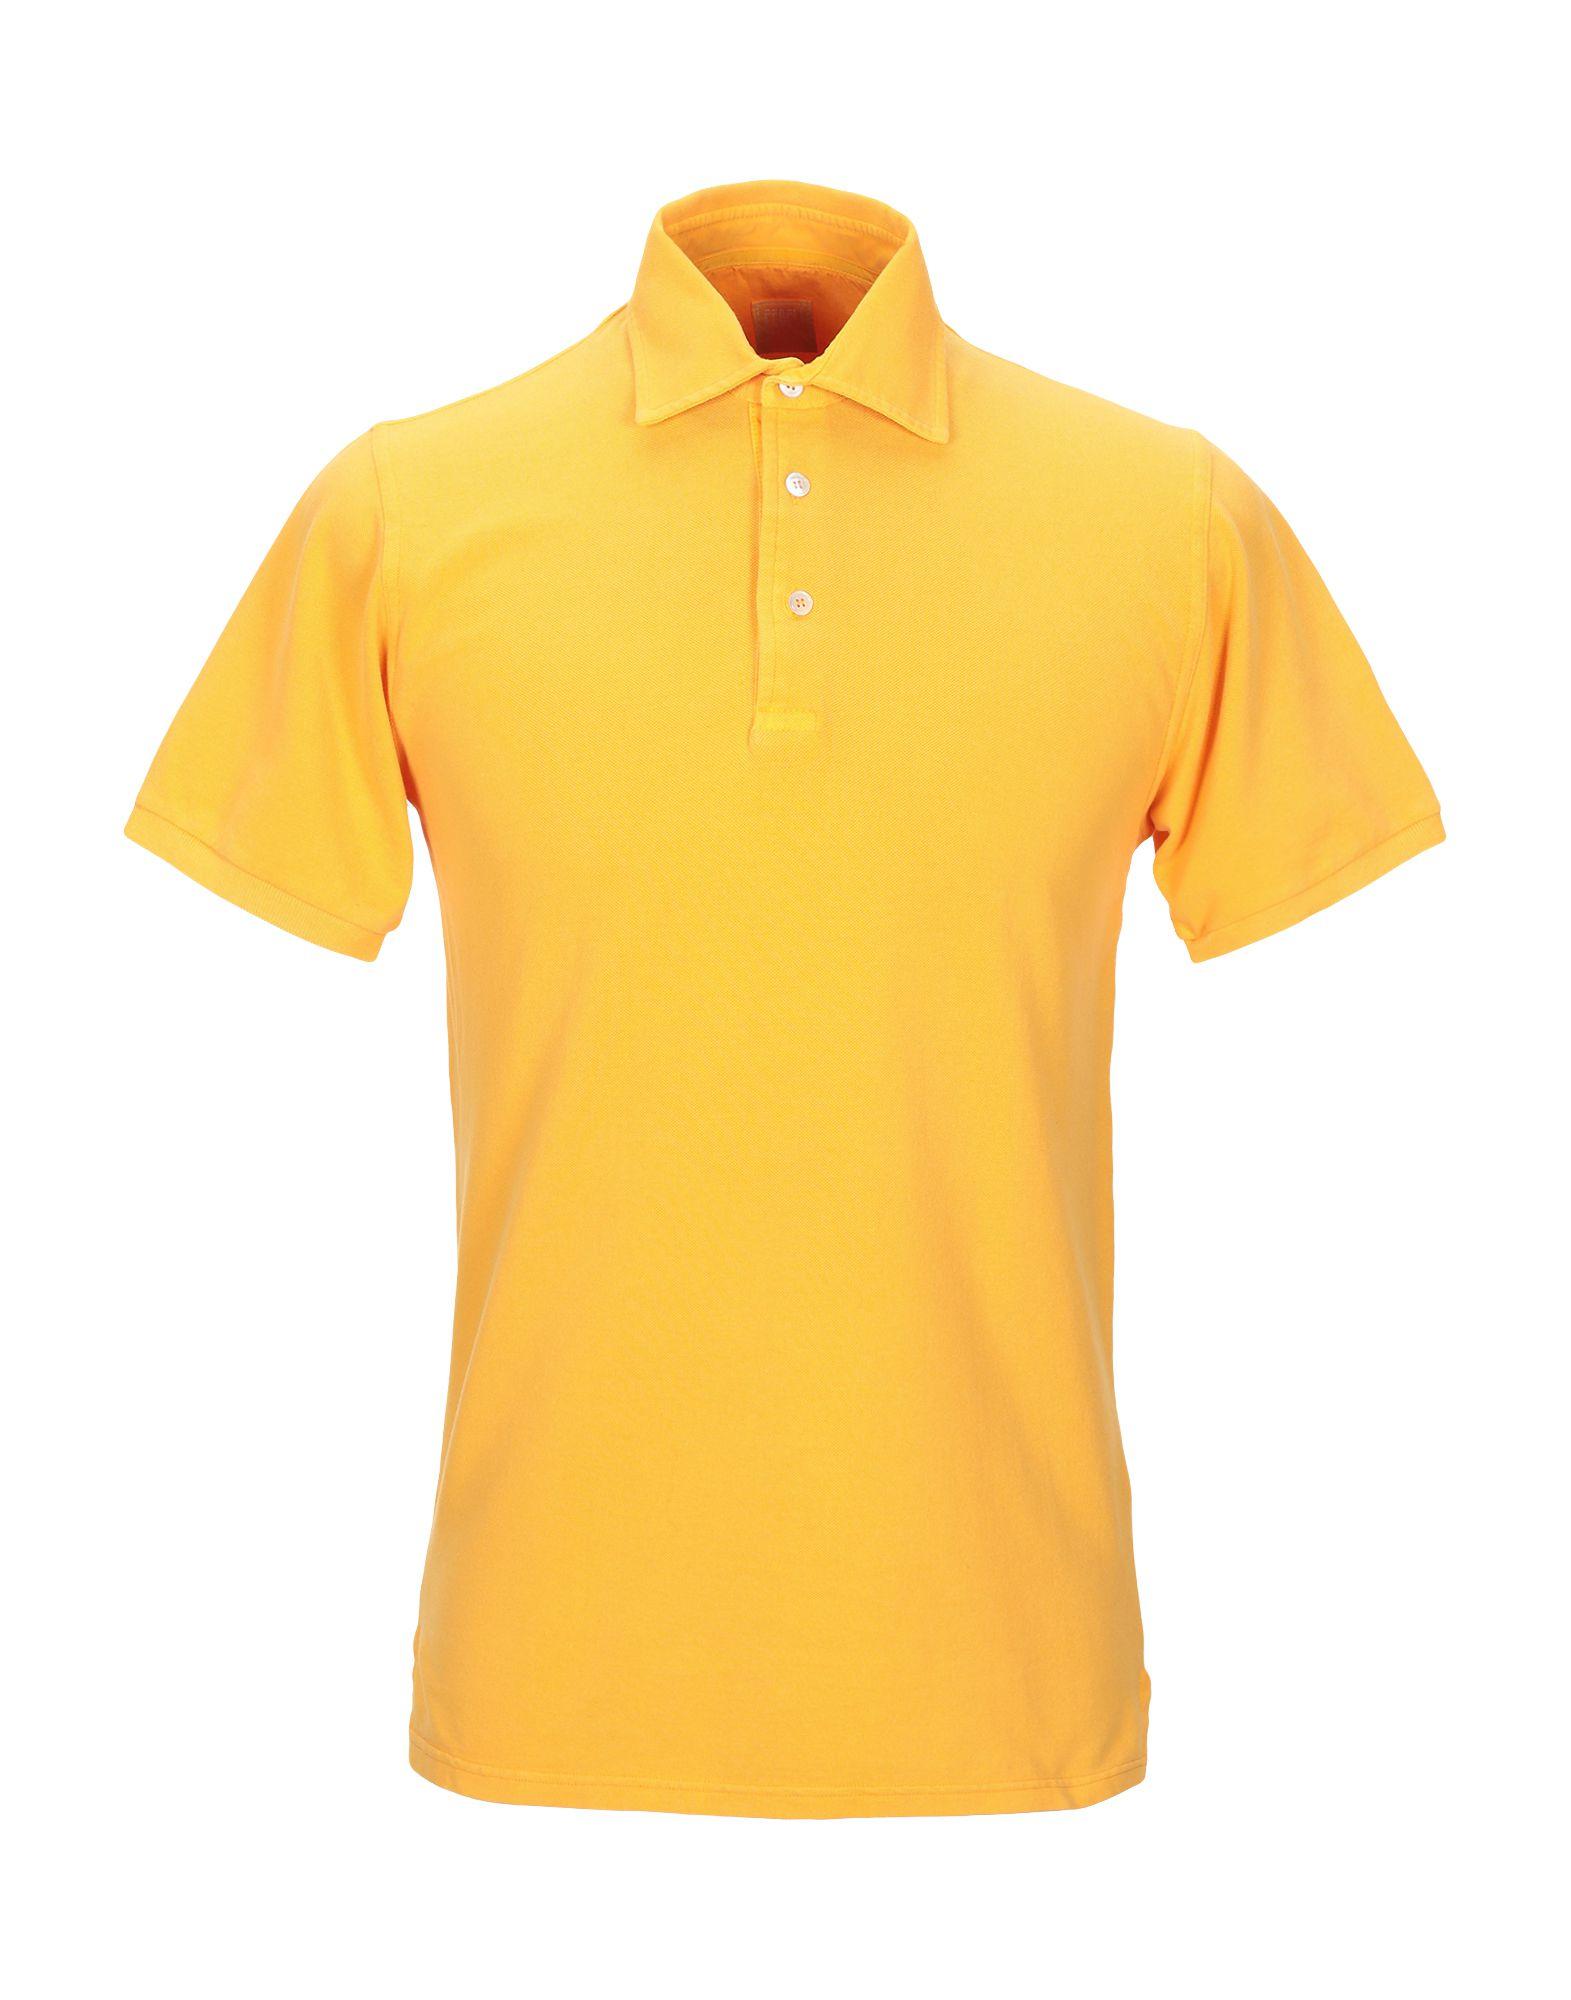 Fedeli Cotton Polo Shirt in Yellow for Men - Lyst